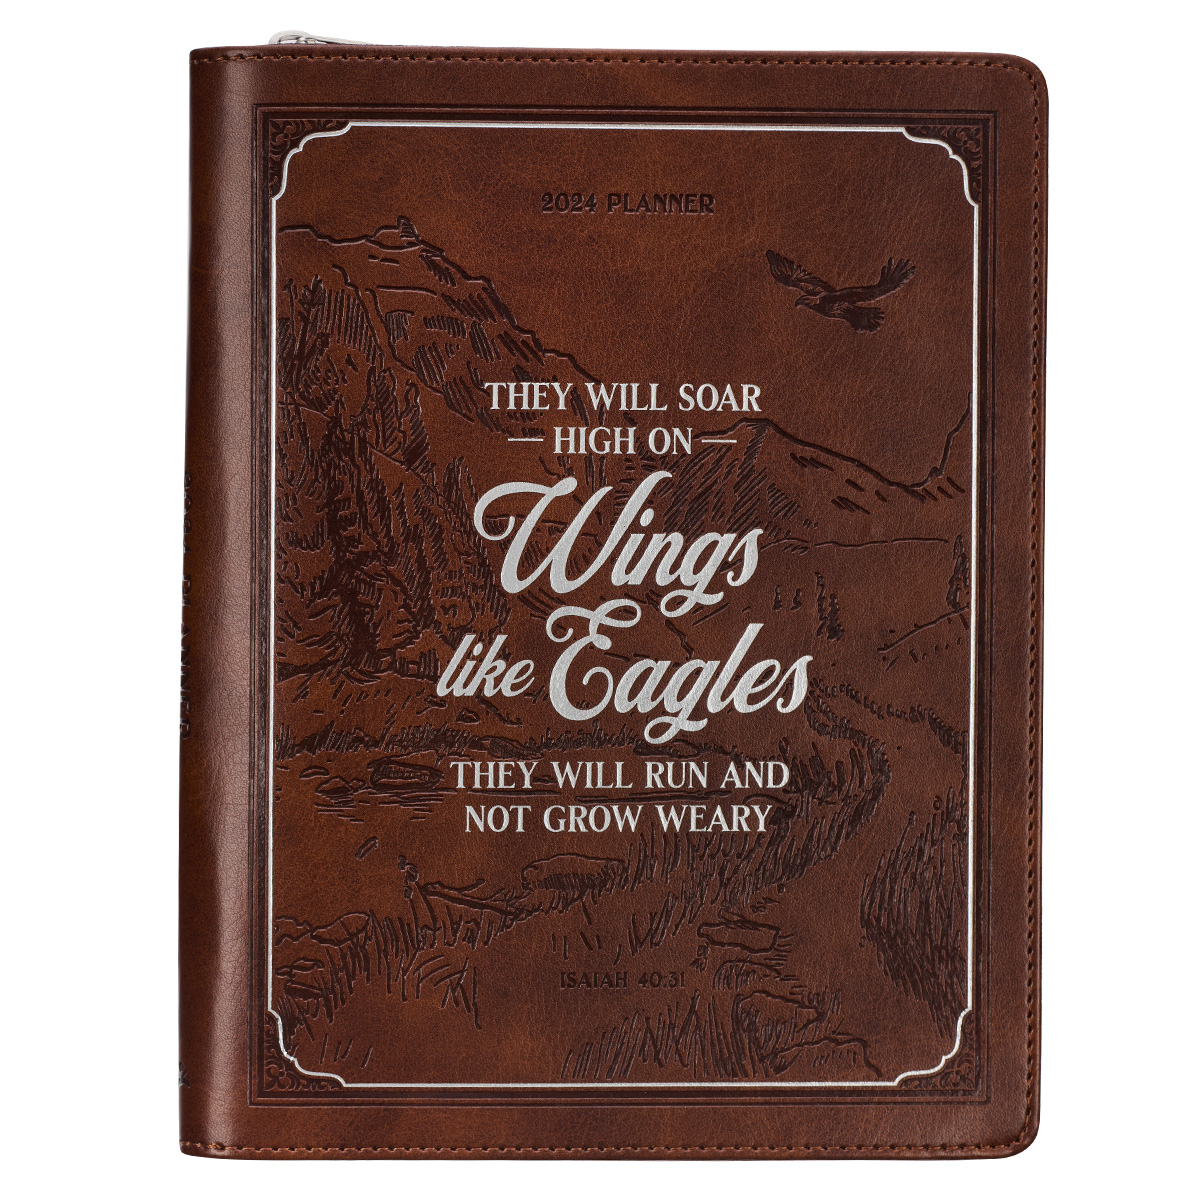 Christian Art Gifts 2024 12 Month Executive Vegan Leather Planner for Men & Women: Wings Like Eagles - Isaiah 40:31 Inspirational Bible Verse, Daily Personal Organizer w/Zipper Closure & Ribbon, Brown - image 1 of 6